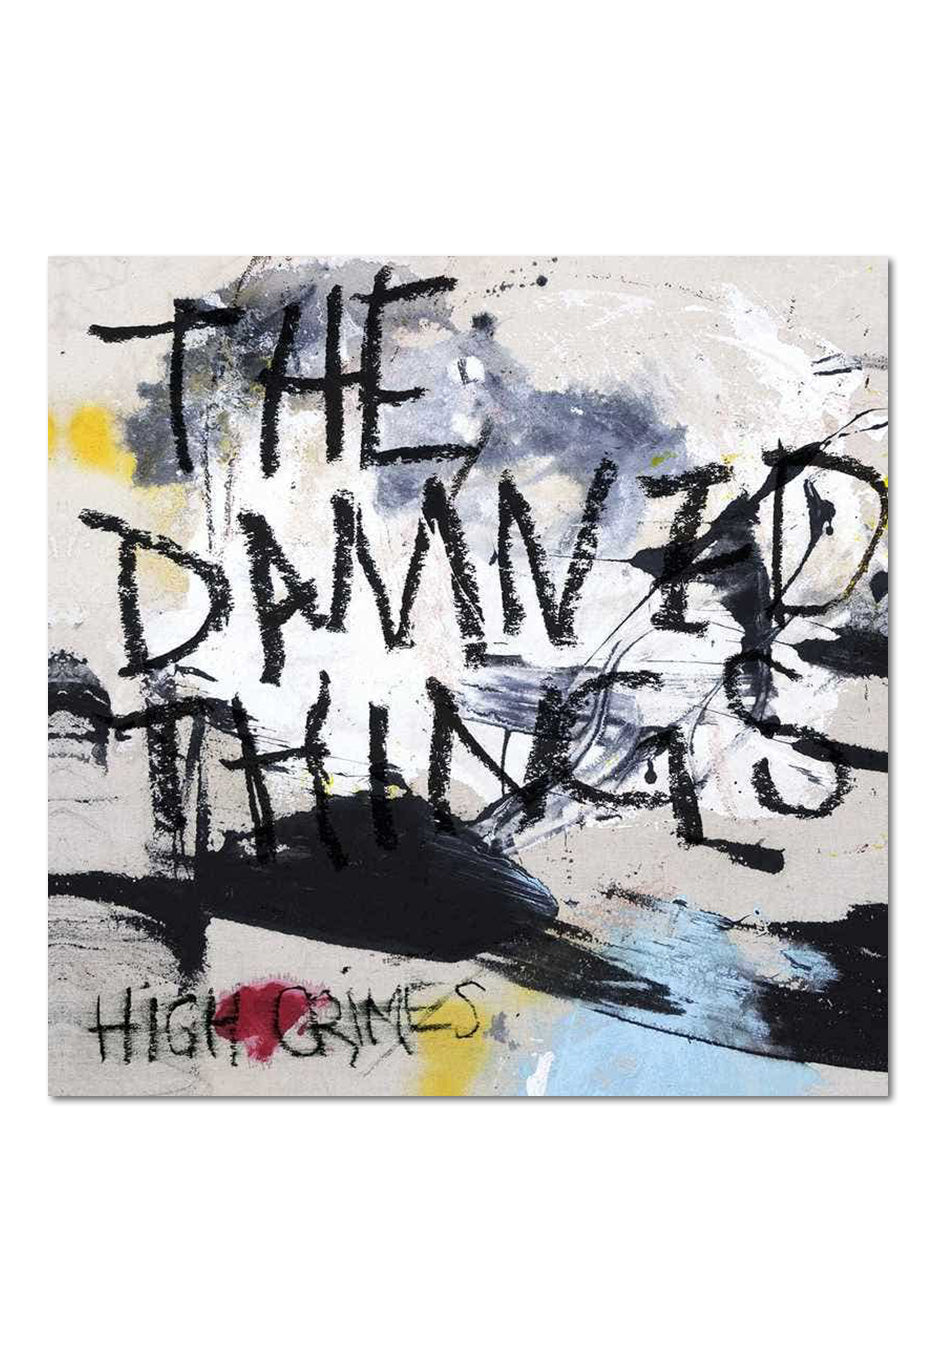 The Damned Things - High Crimes - CD